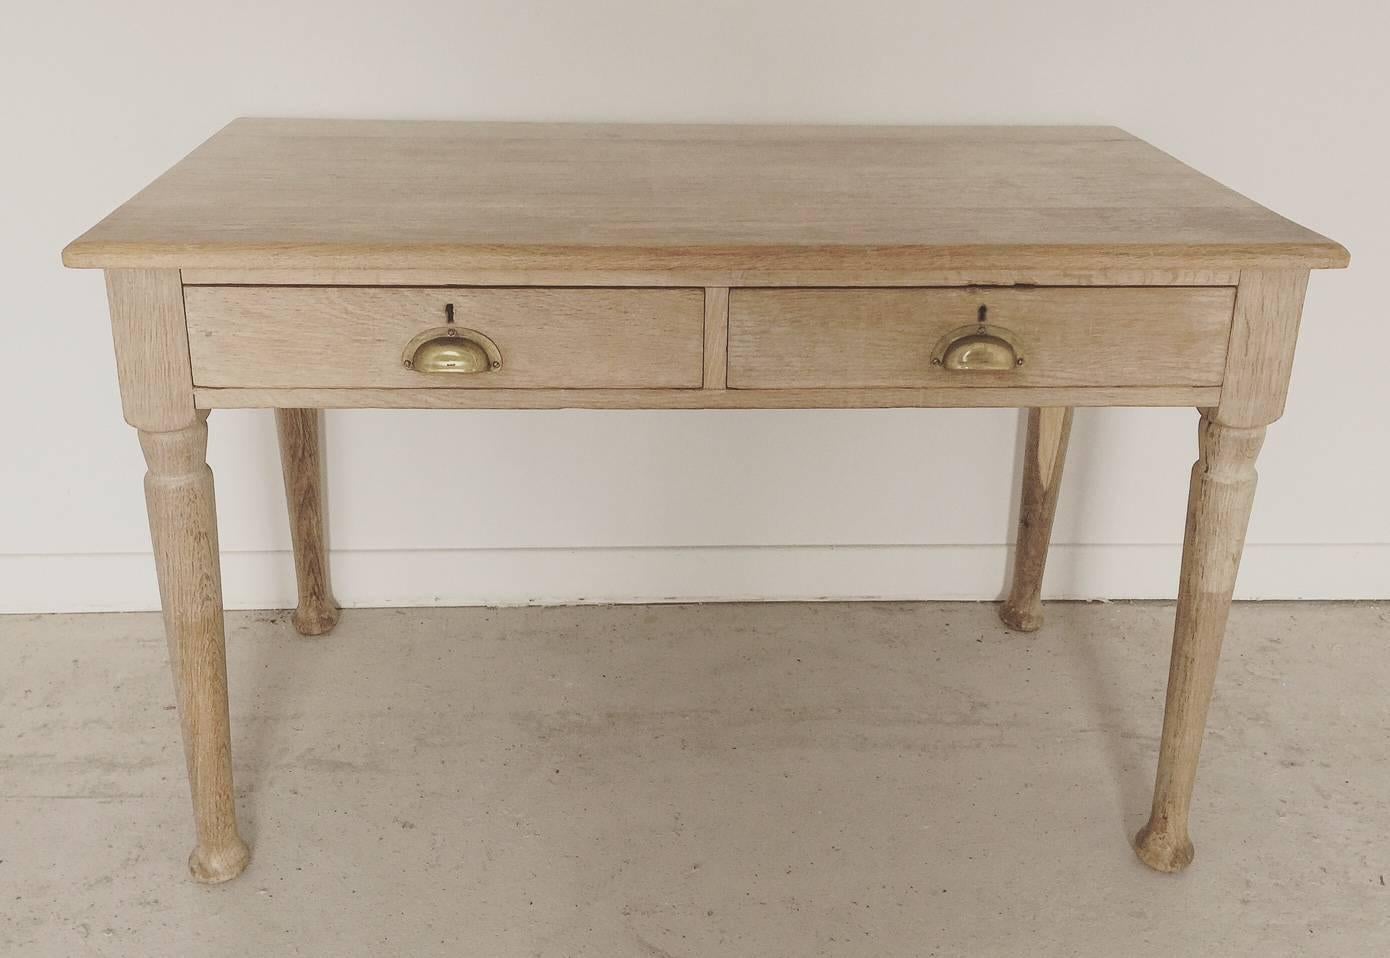 Antique Vintage English bleached oak desk table with two drawers and brass cuped handles.